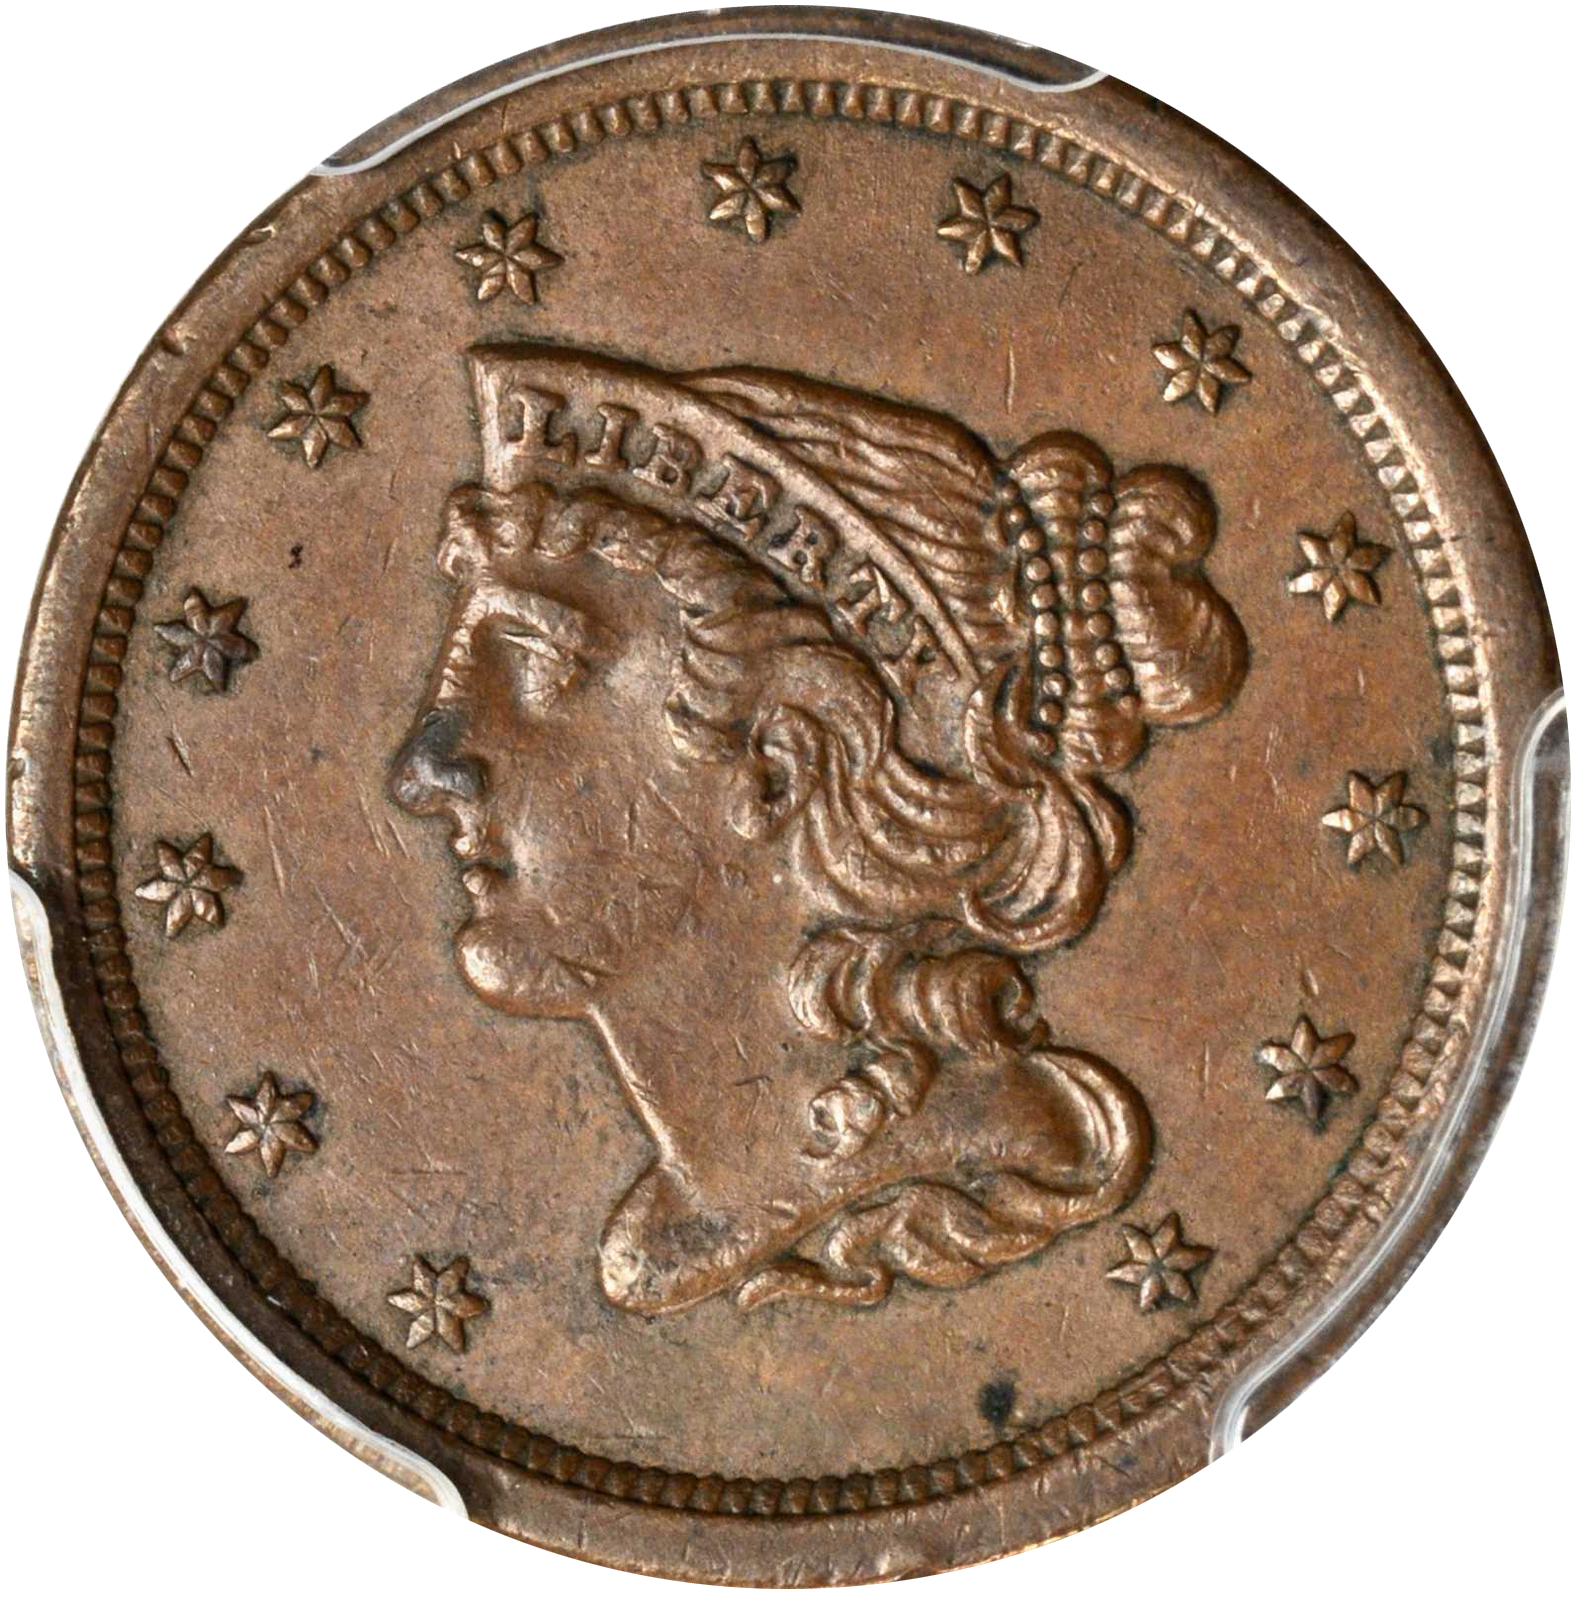 Braided Hair Half Cents (1840-1857), Coin Auction Prices